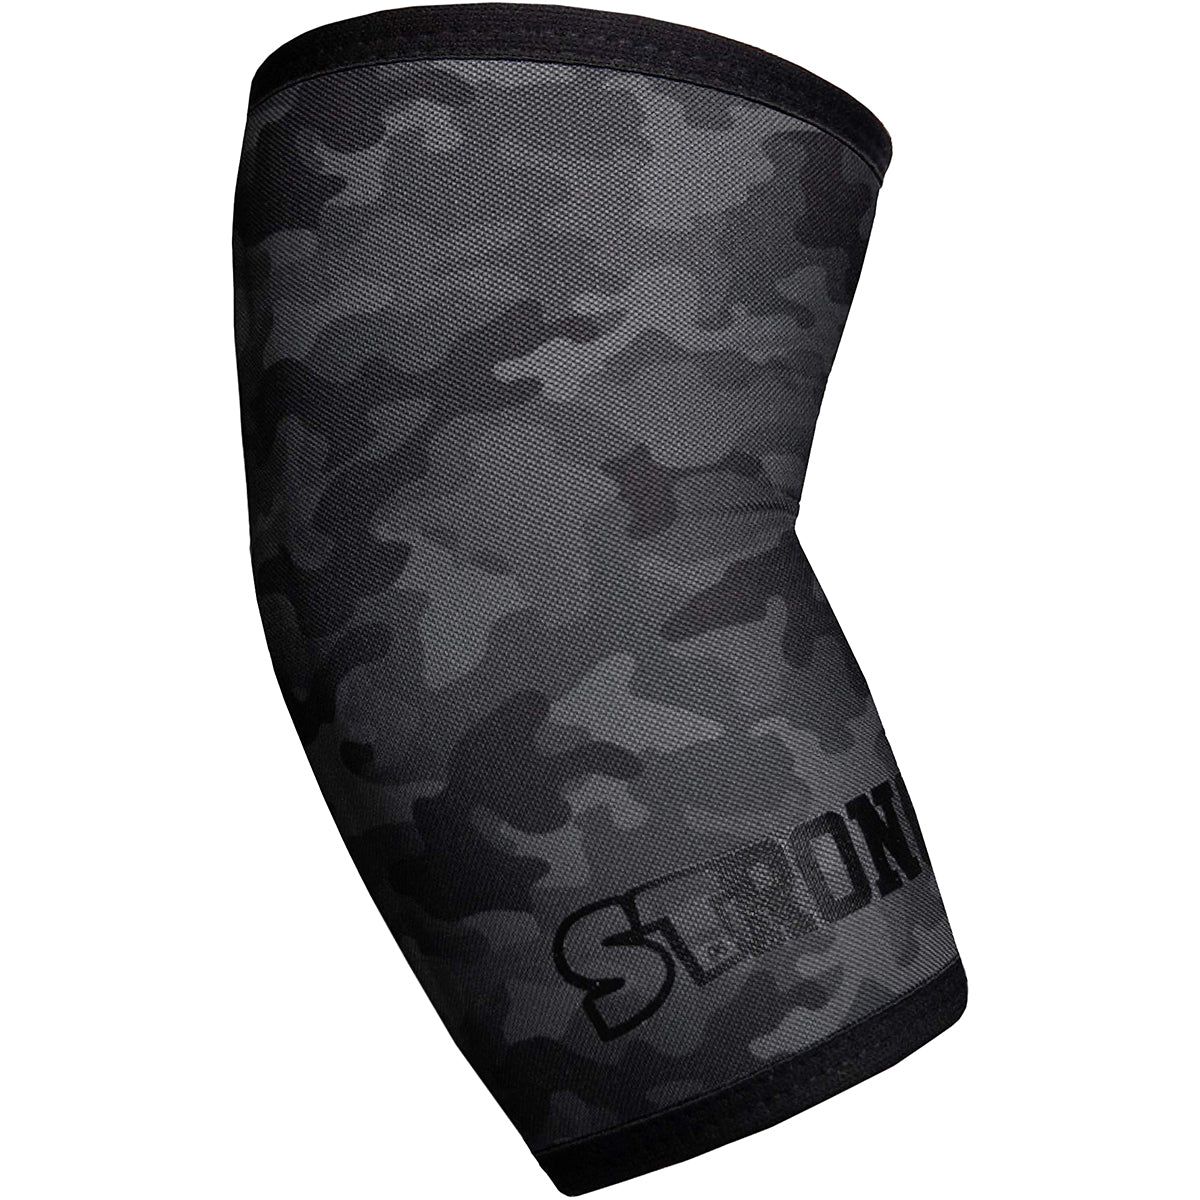 Sling Shot STrong Compression Elbow Sleeves by Mark Bell - 5mm thick- Black Camo Sling Shot